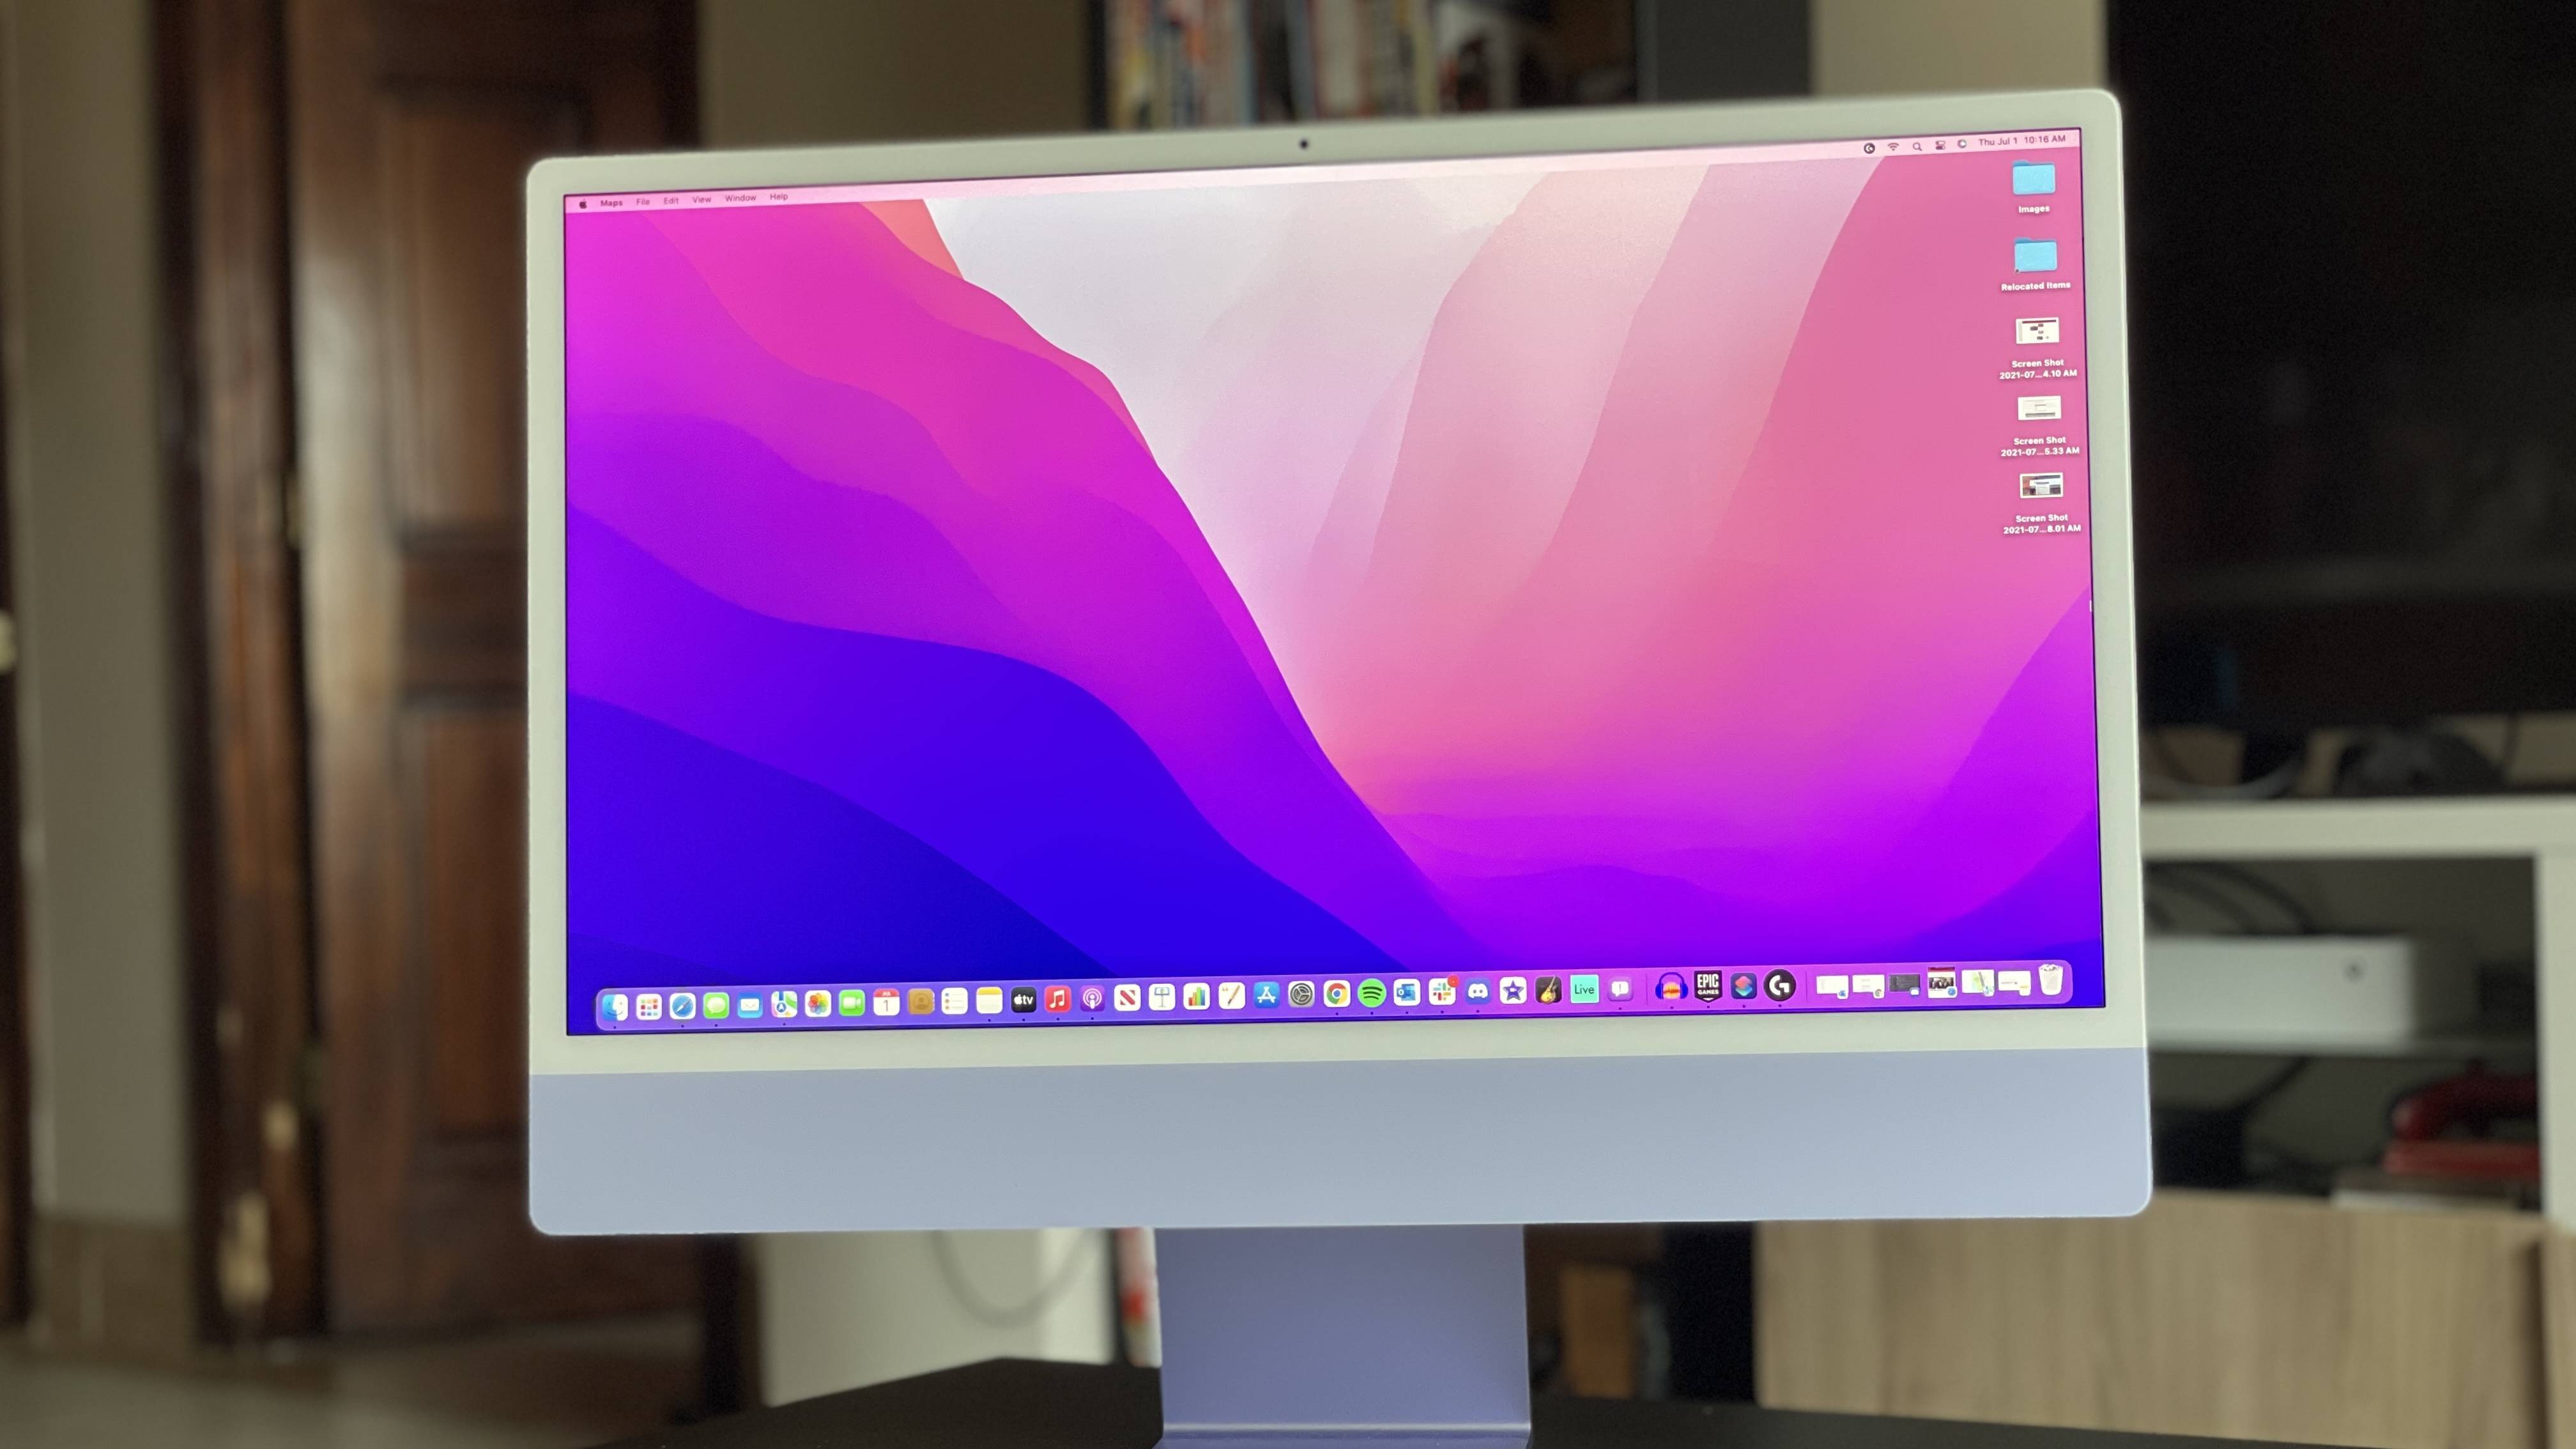 what is the latest imac operating system